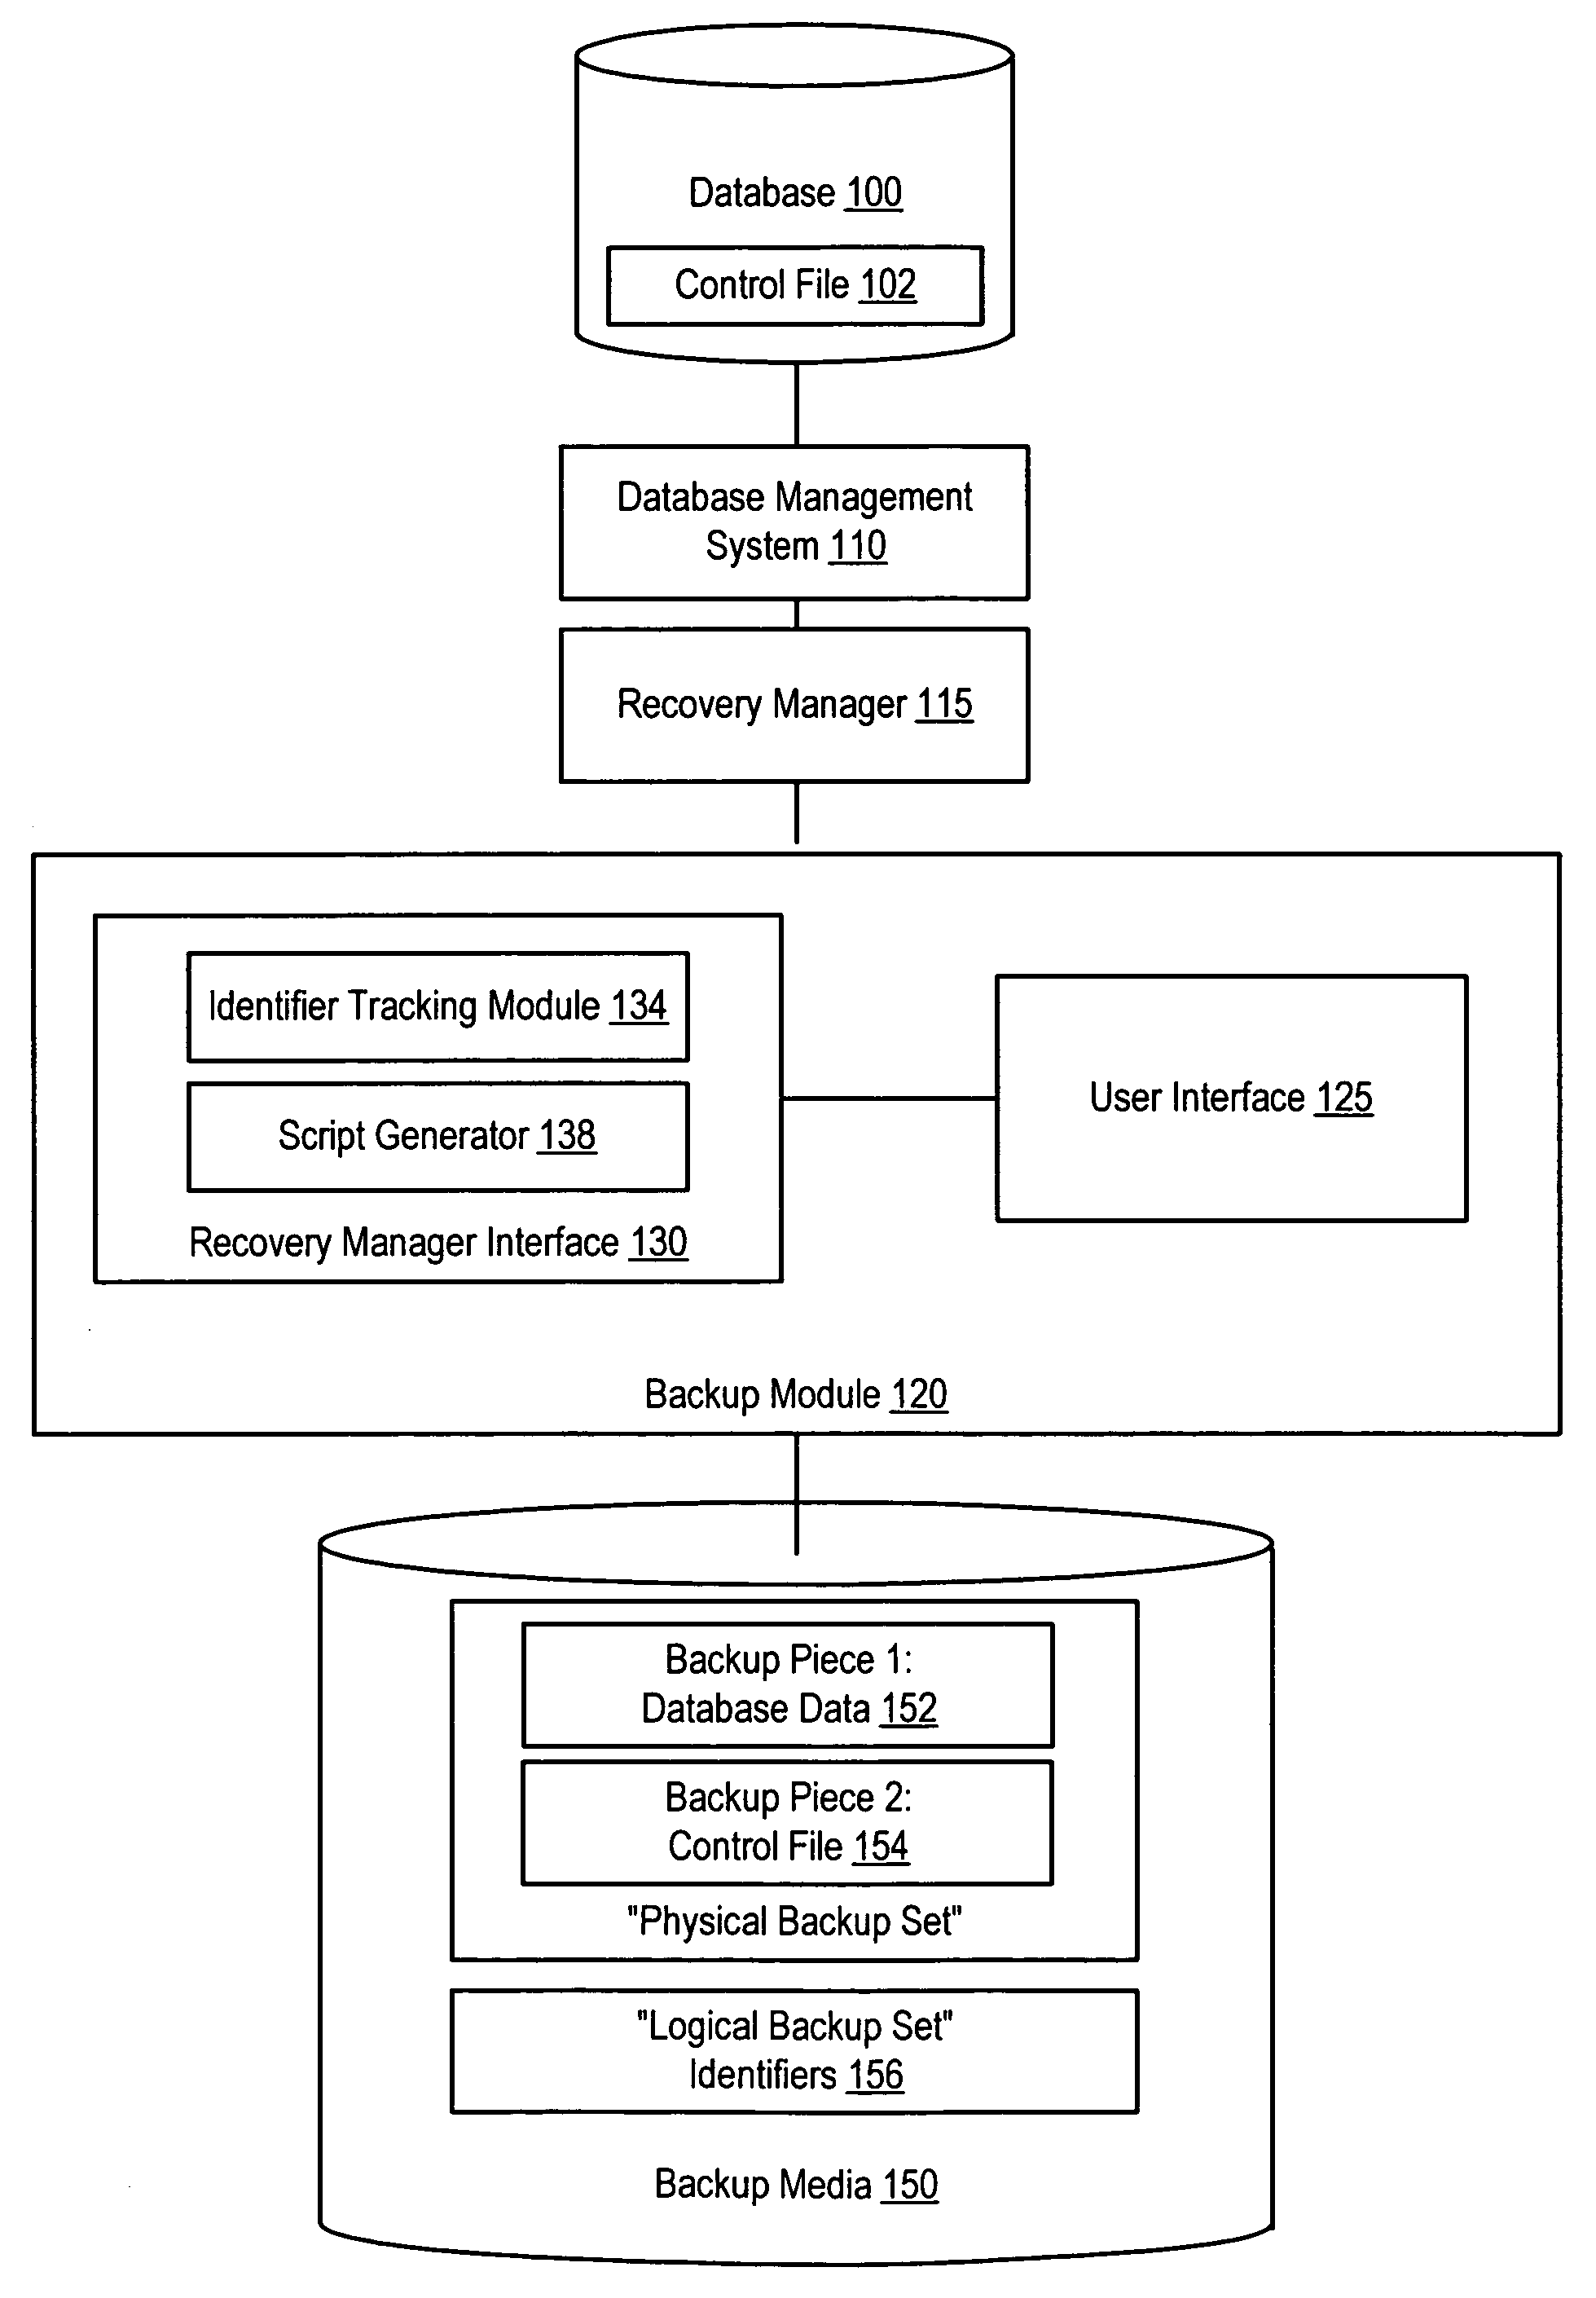 User interface for viewing logical representation of a database backed up by a database recovery manager